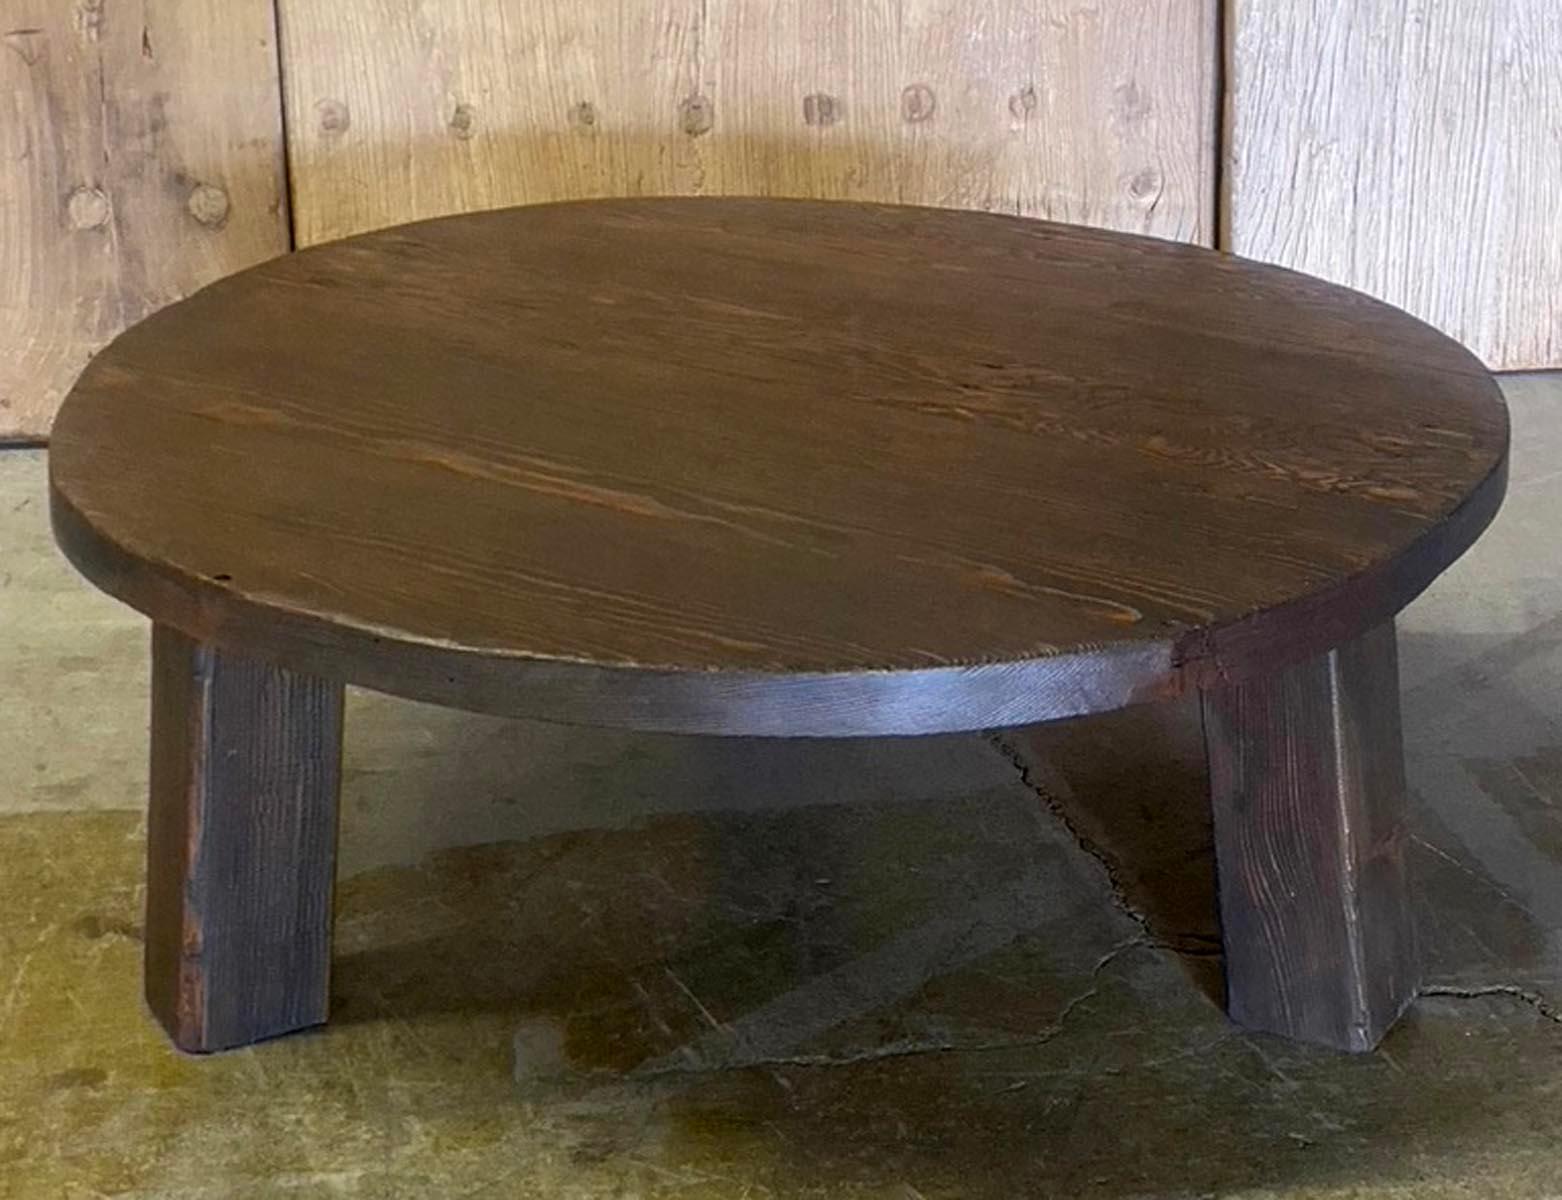 Round rustic coffee table with three legs made in reclaimed Douglas fir. Reclaimed wood may show surface cracks, nail holes and knots. Finish is smooth. Can be custom made in different sizes and finishes.